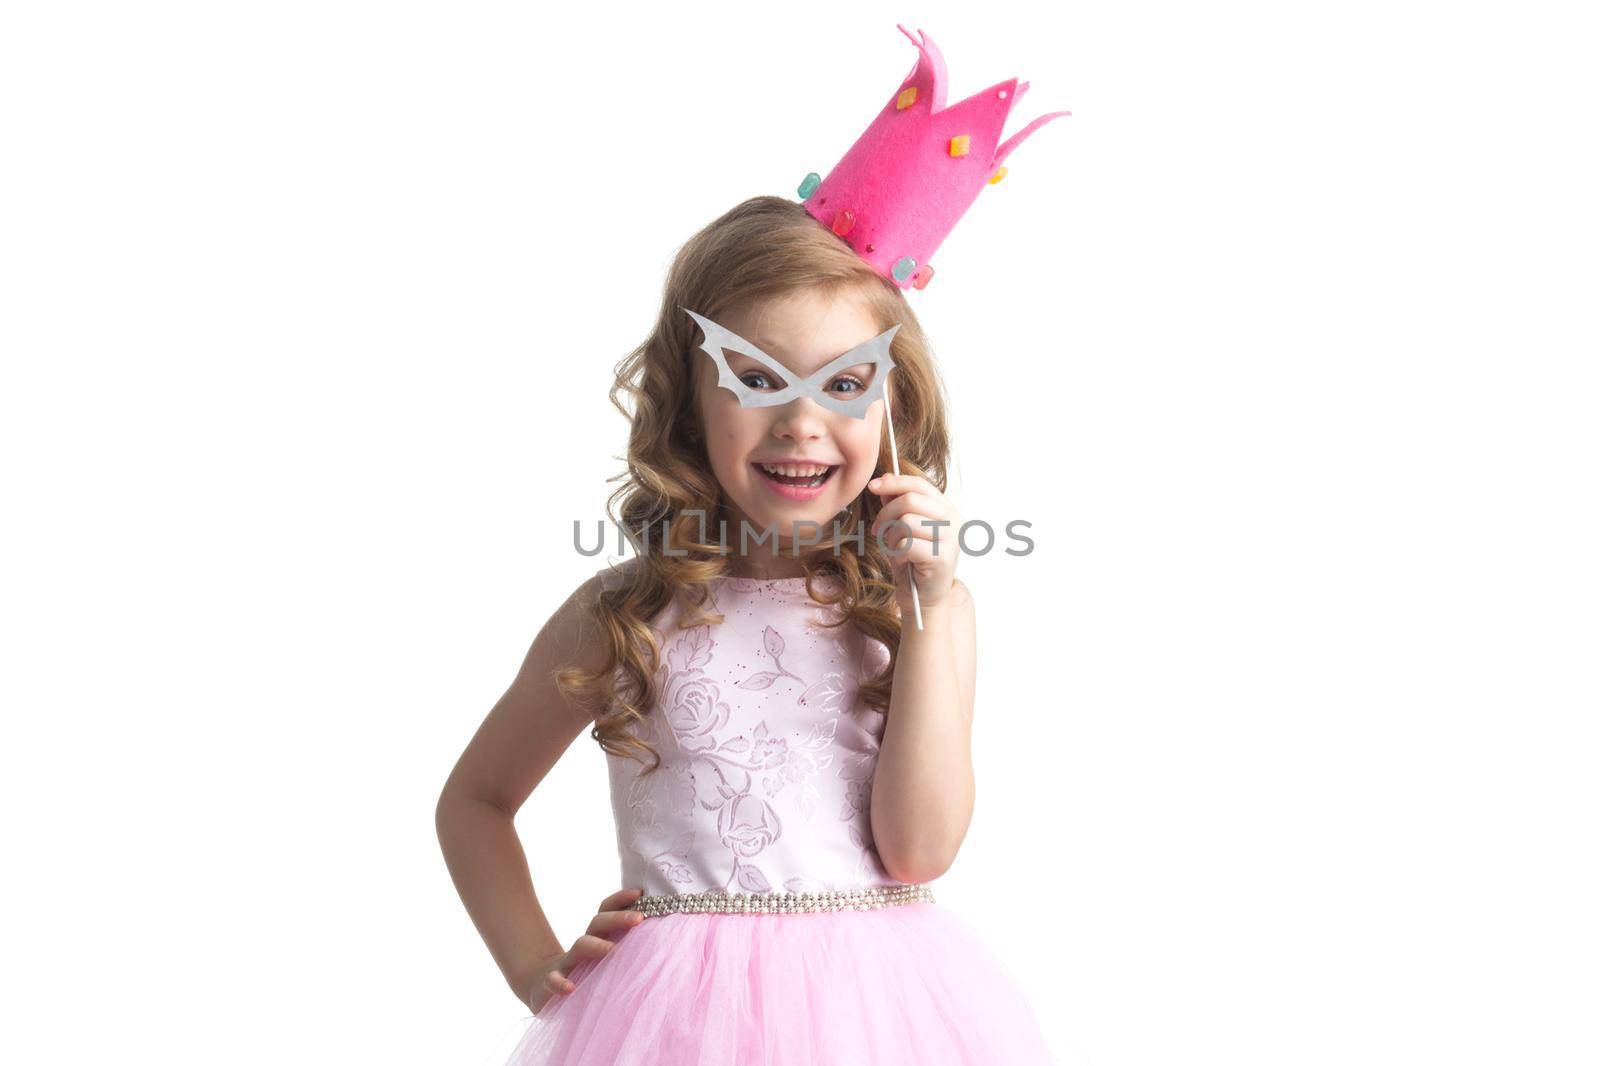 Funny princess girl in pink dress and crown holding party glasses on stick isolated on white background